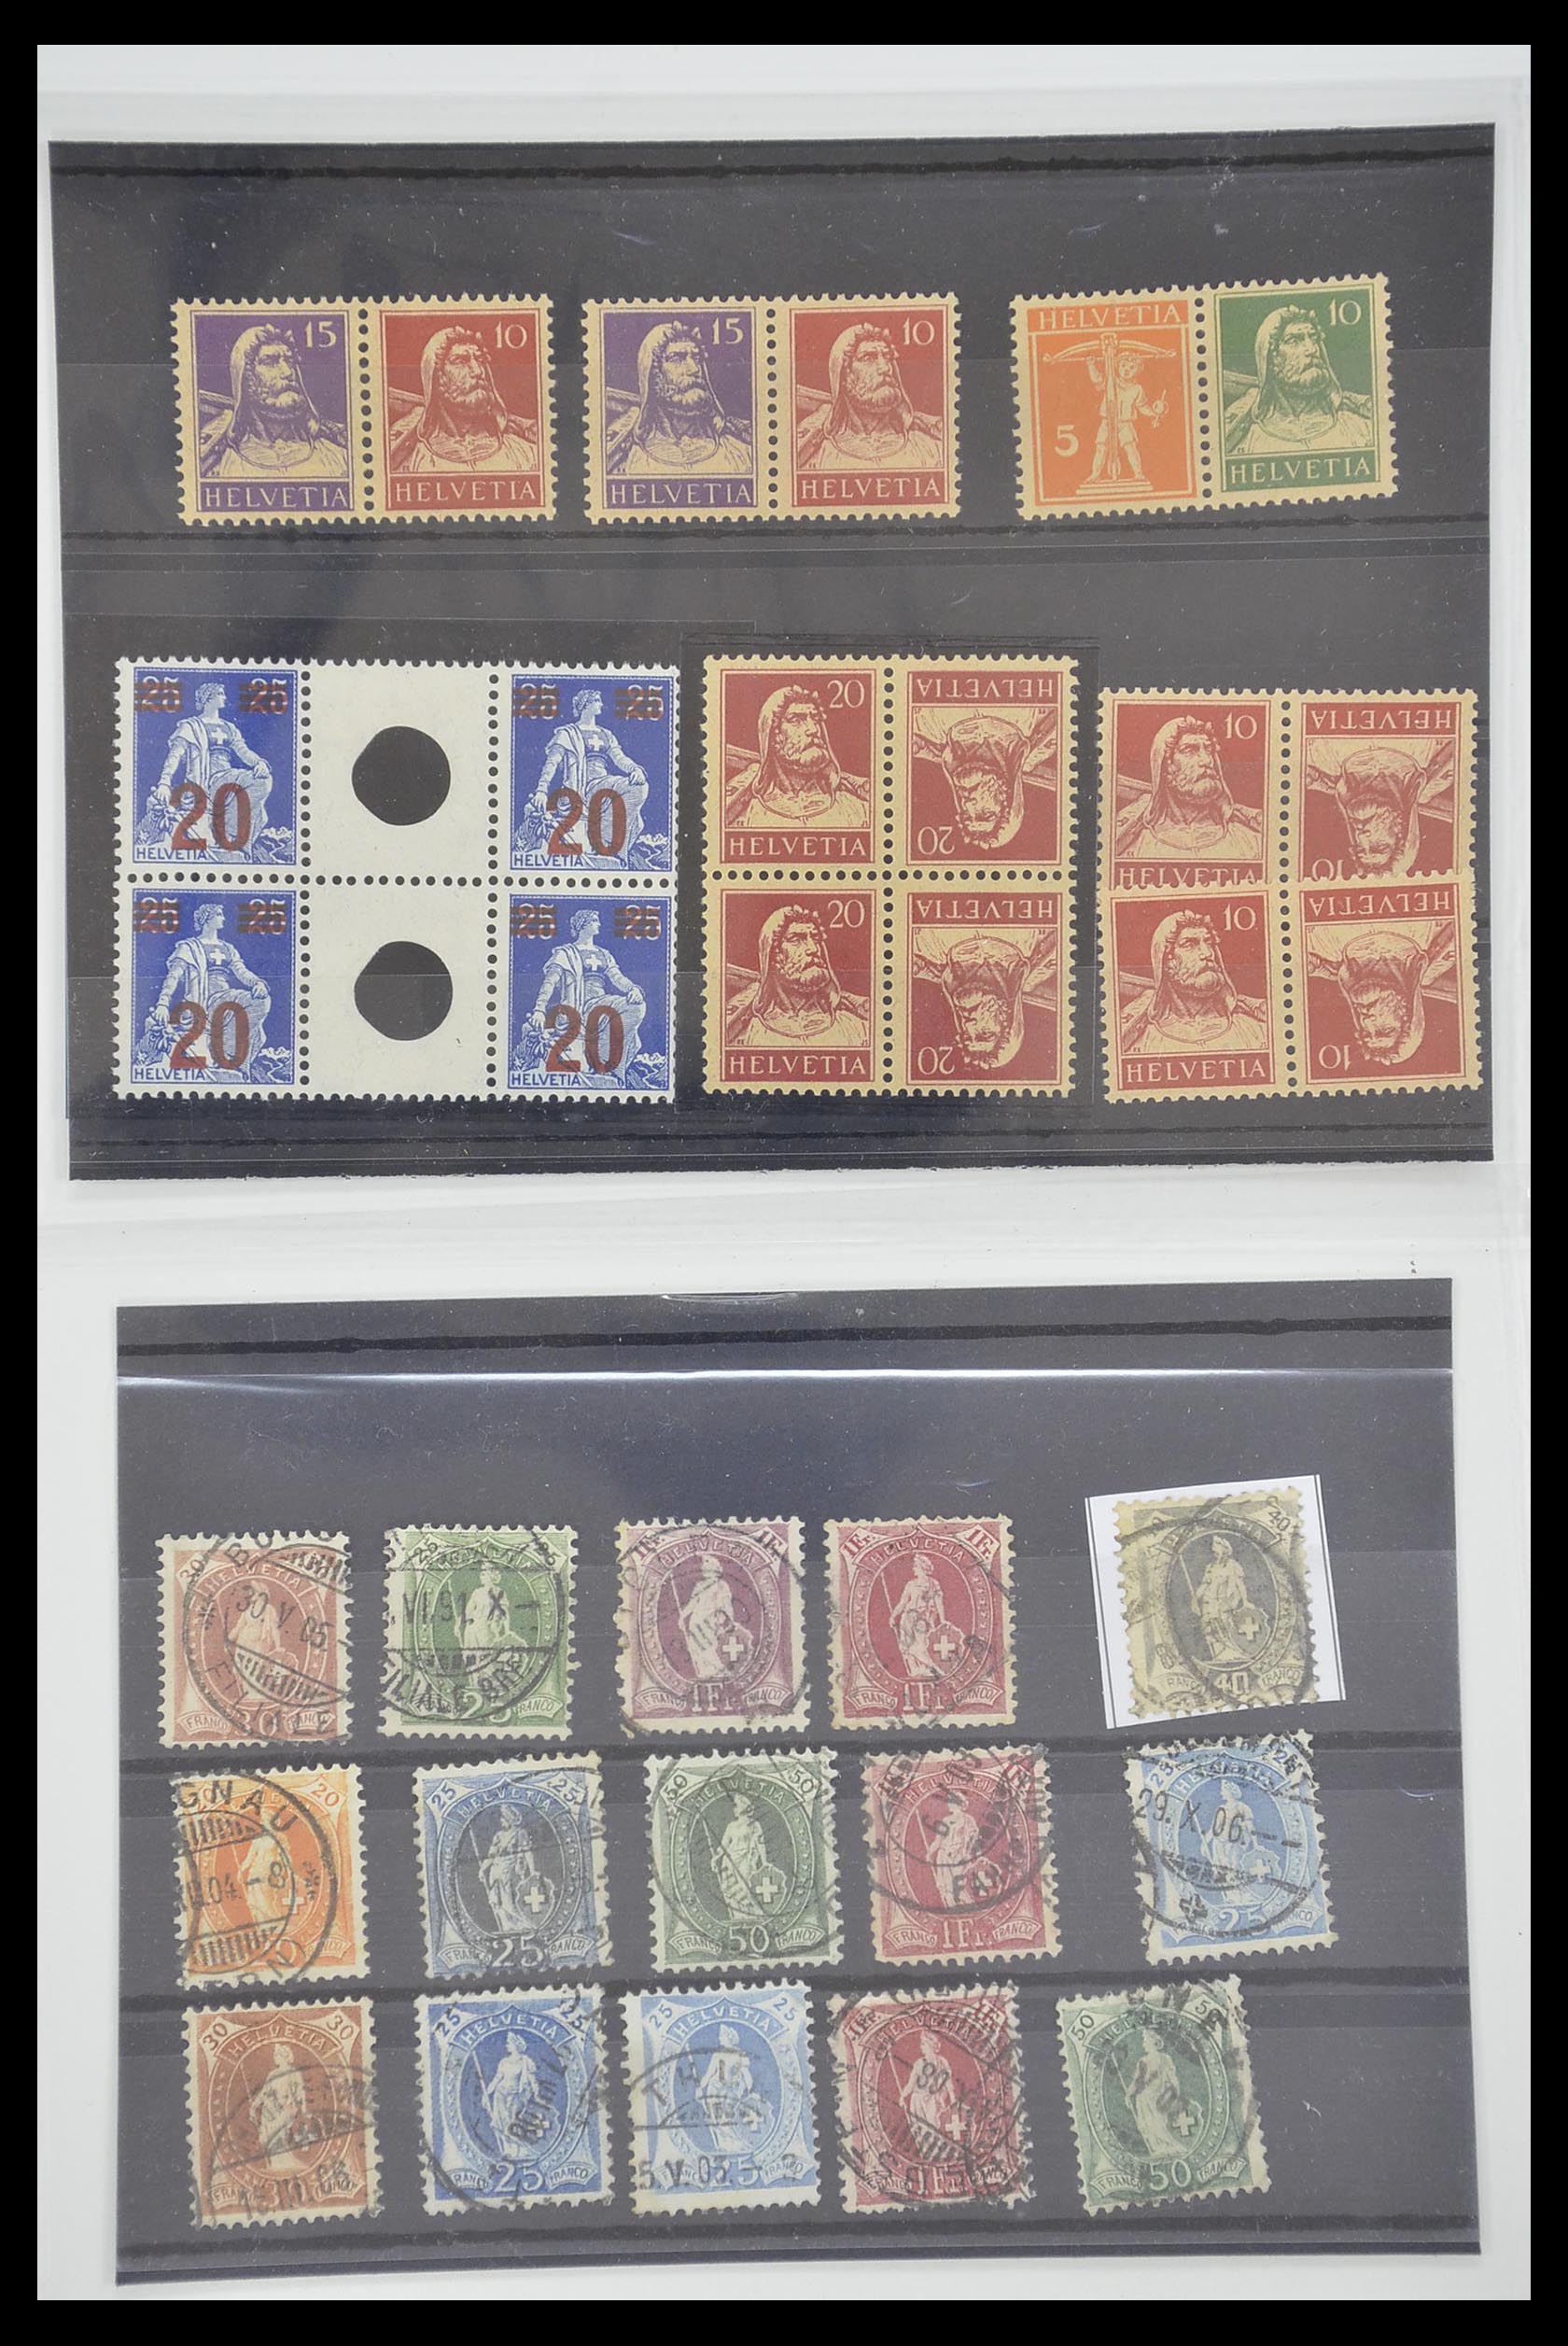 33284 018 - Stamp collection 33284 Switzerland better issues 1900-1995.